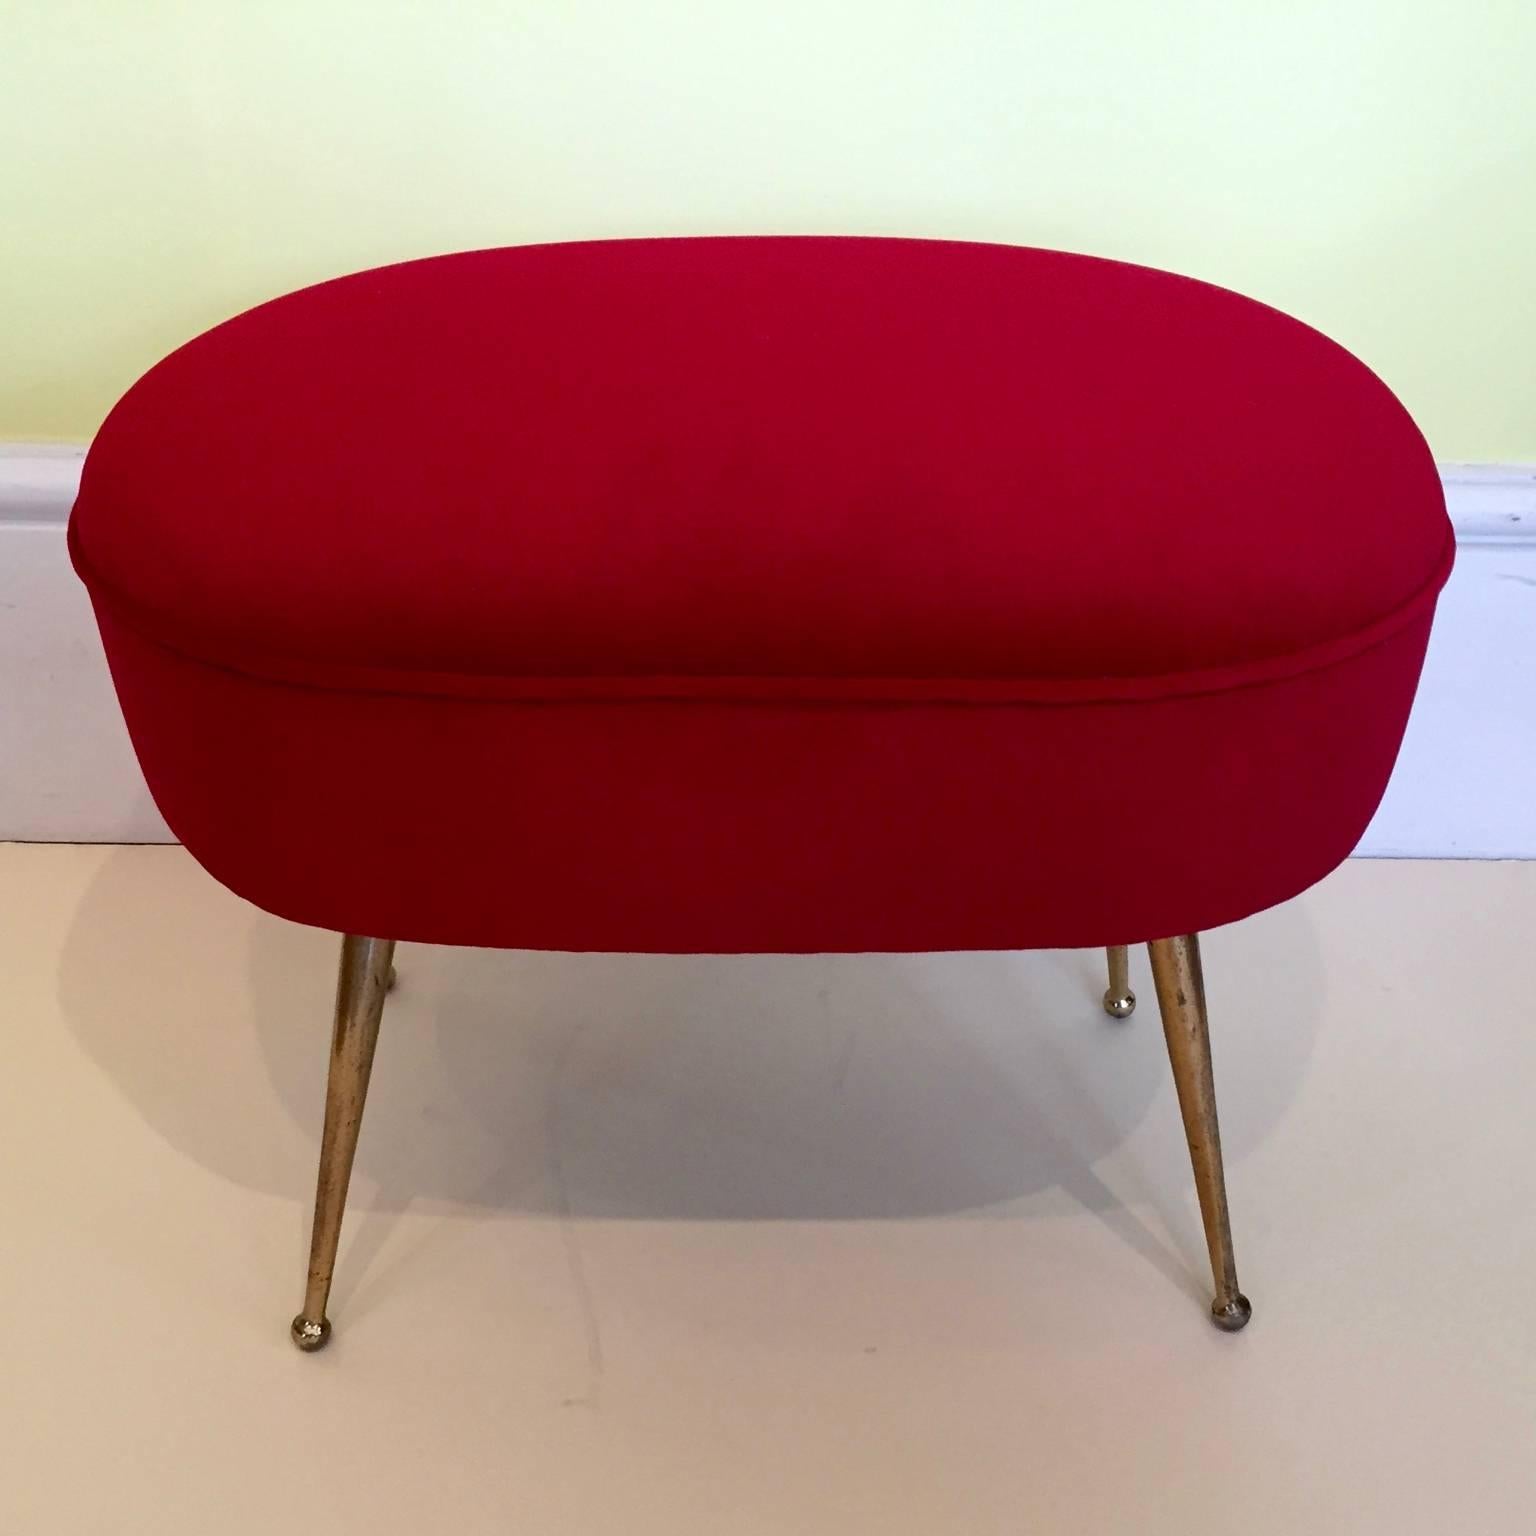 A pair of red Italian 1950s footstools, reupholstered.